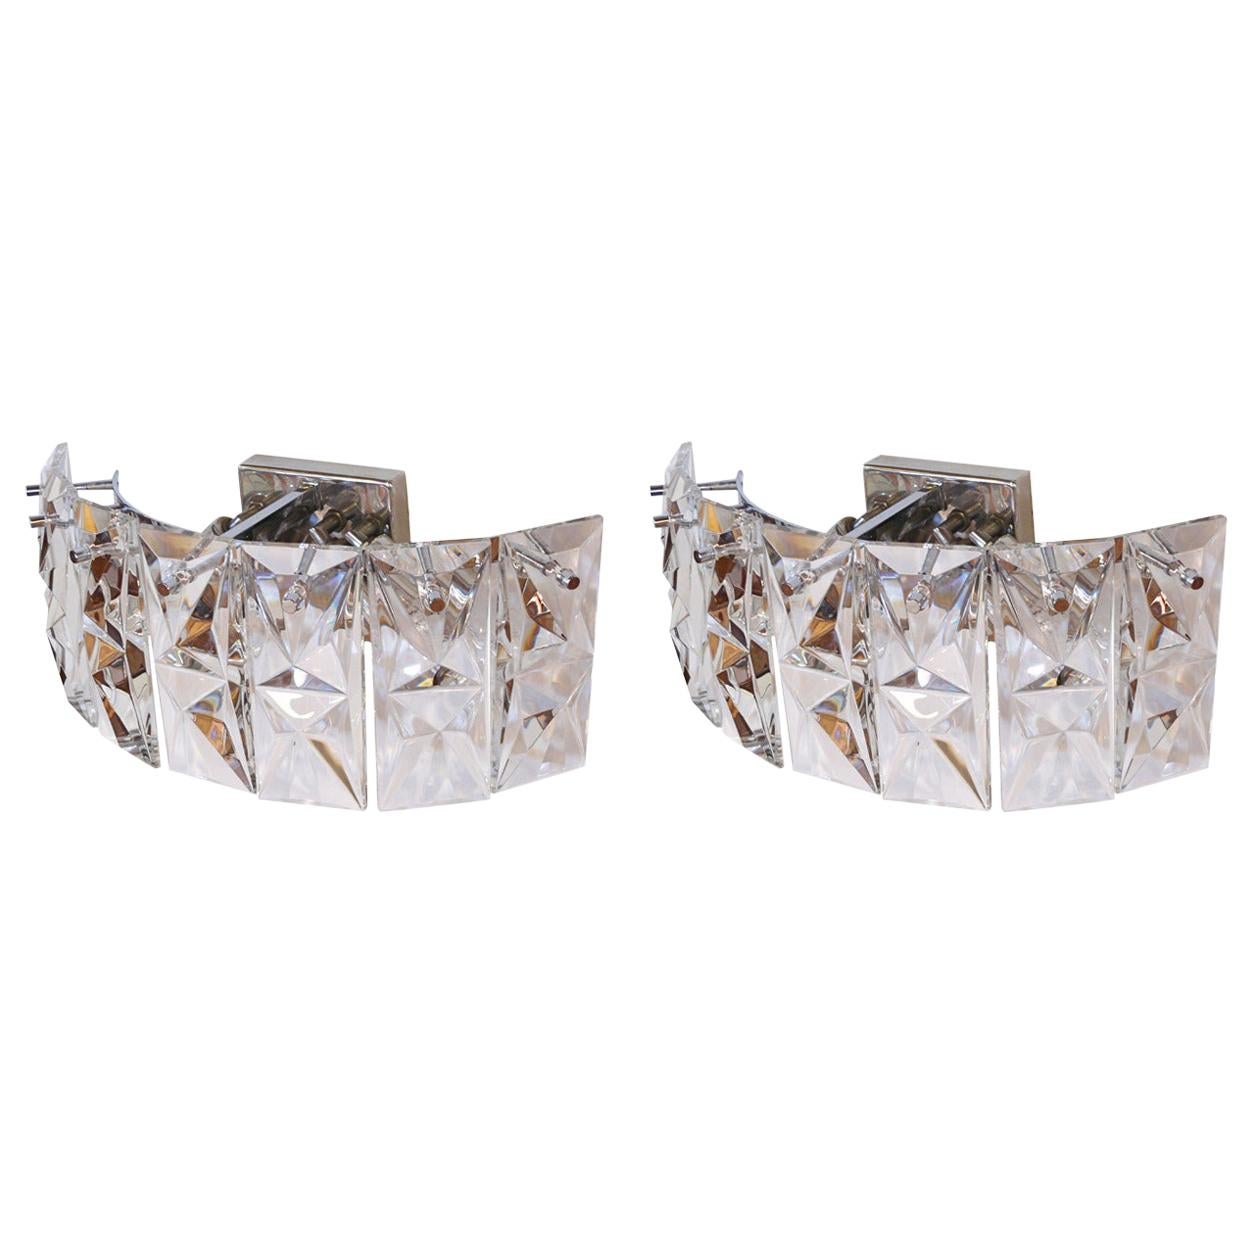 Pair of Prismatic Glass Sconces by Kindeley For Sale